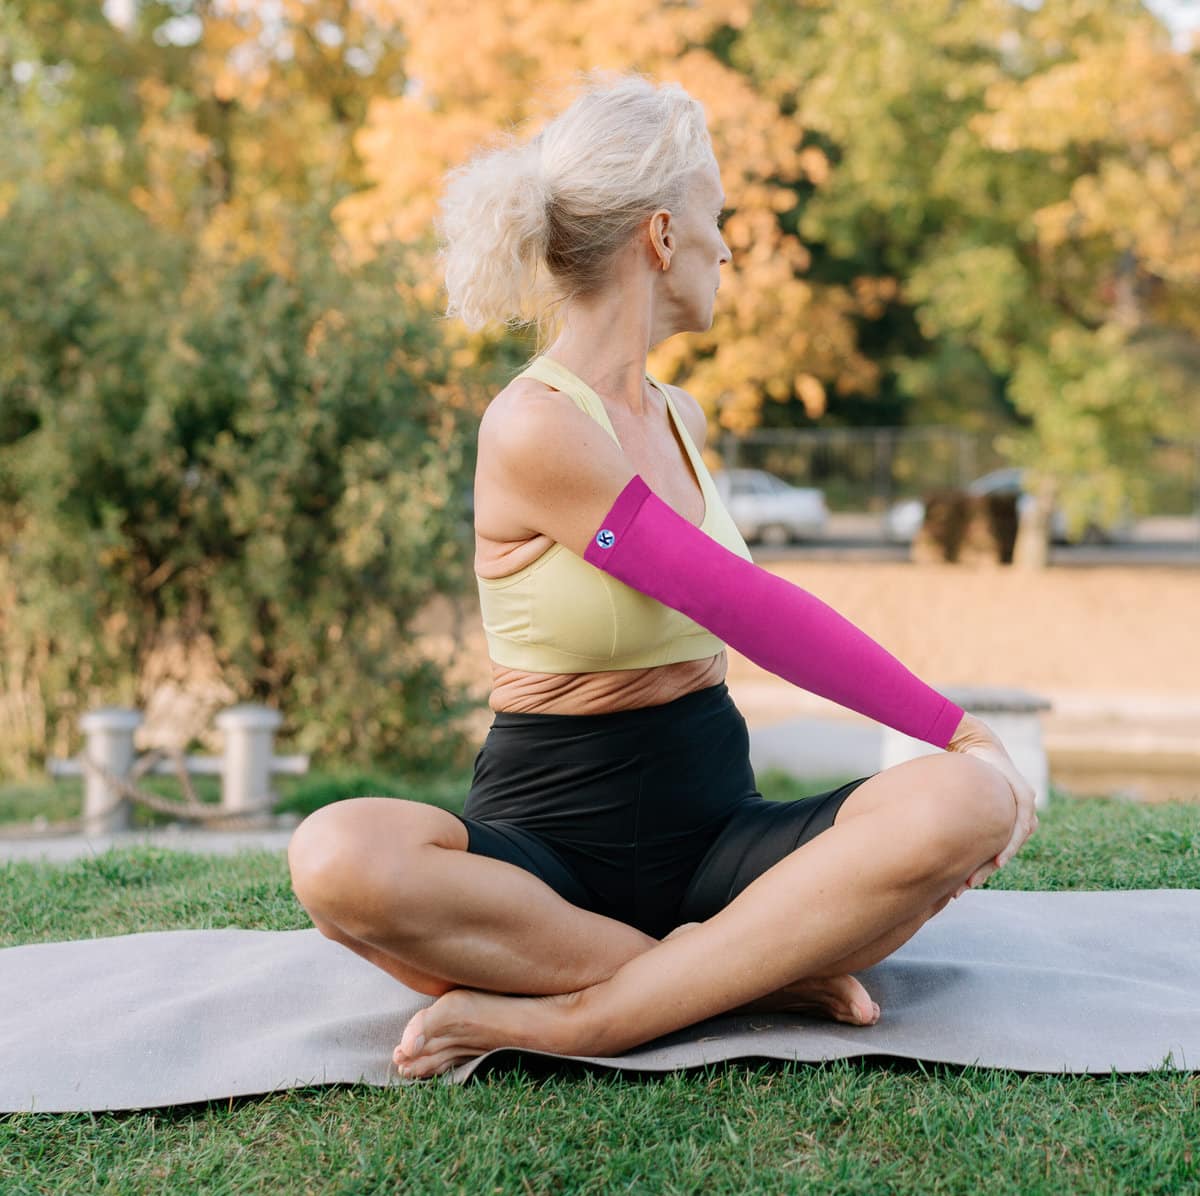 A woman doing her yoga session with Kinship arm sleeve